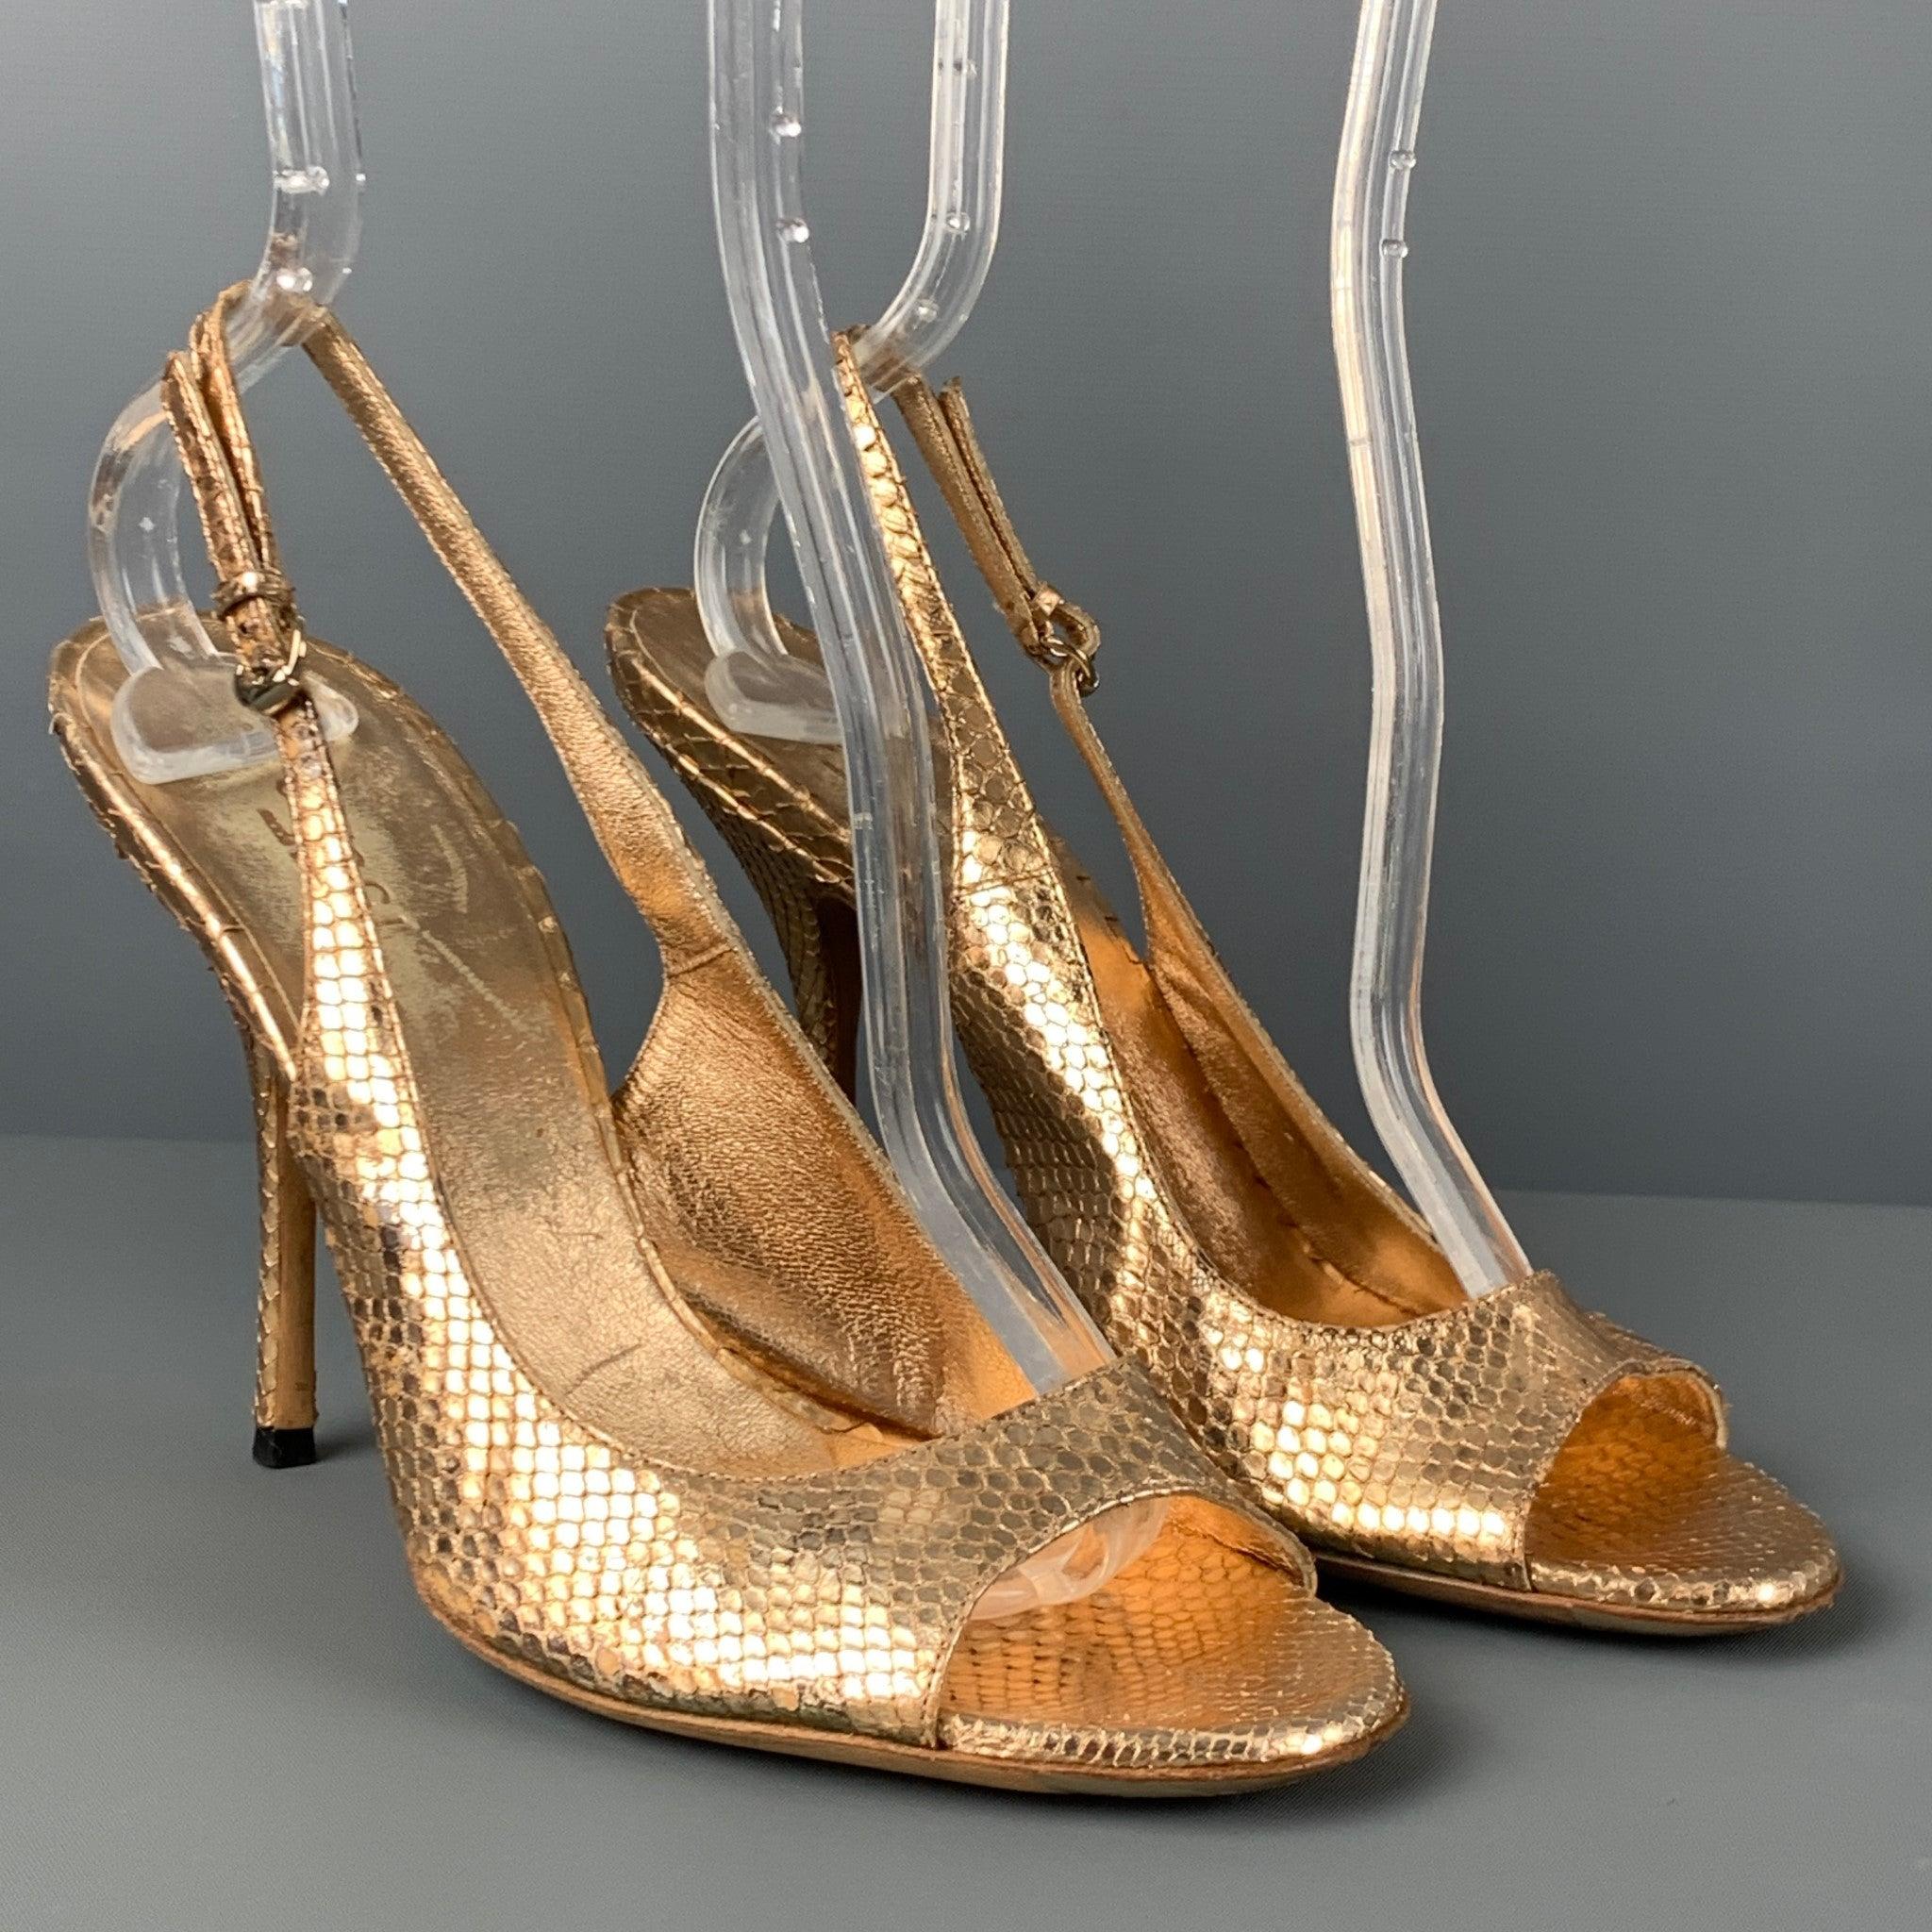 GUCCI sandals comes in a gold metallic snakeskin leather featuring a adjustable sling back design, open toe, and a stiletto heel. Made in Italy.Good
Pre-Owned Condition.
Light wear throughout. As-is.  

Marked:   37 C 

Measurements: 
  Heel: 4.25